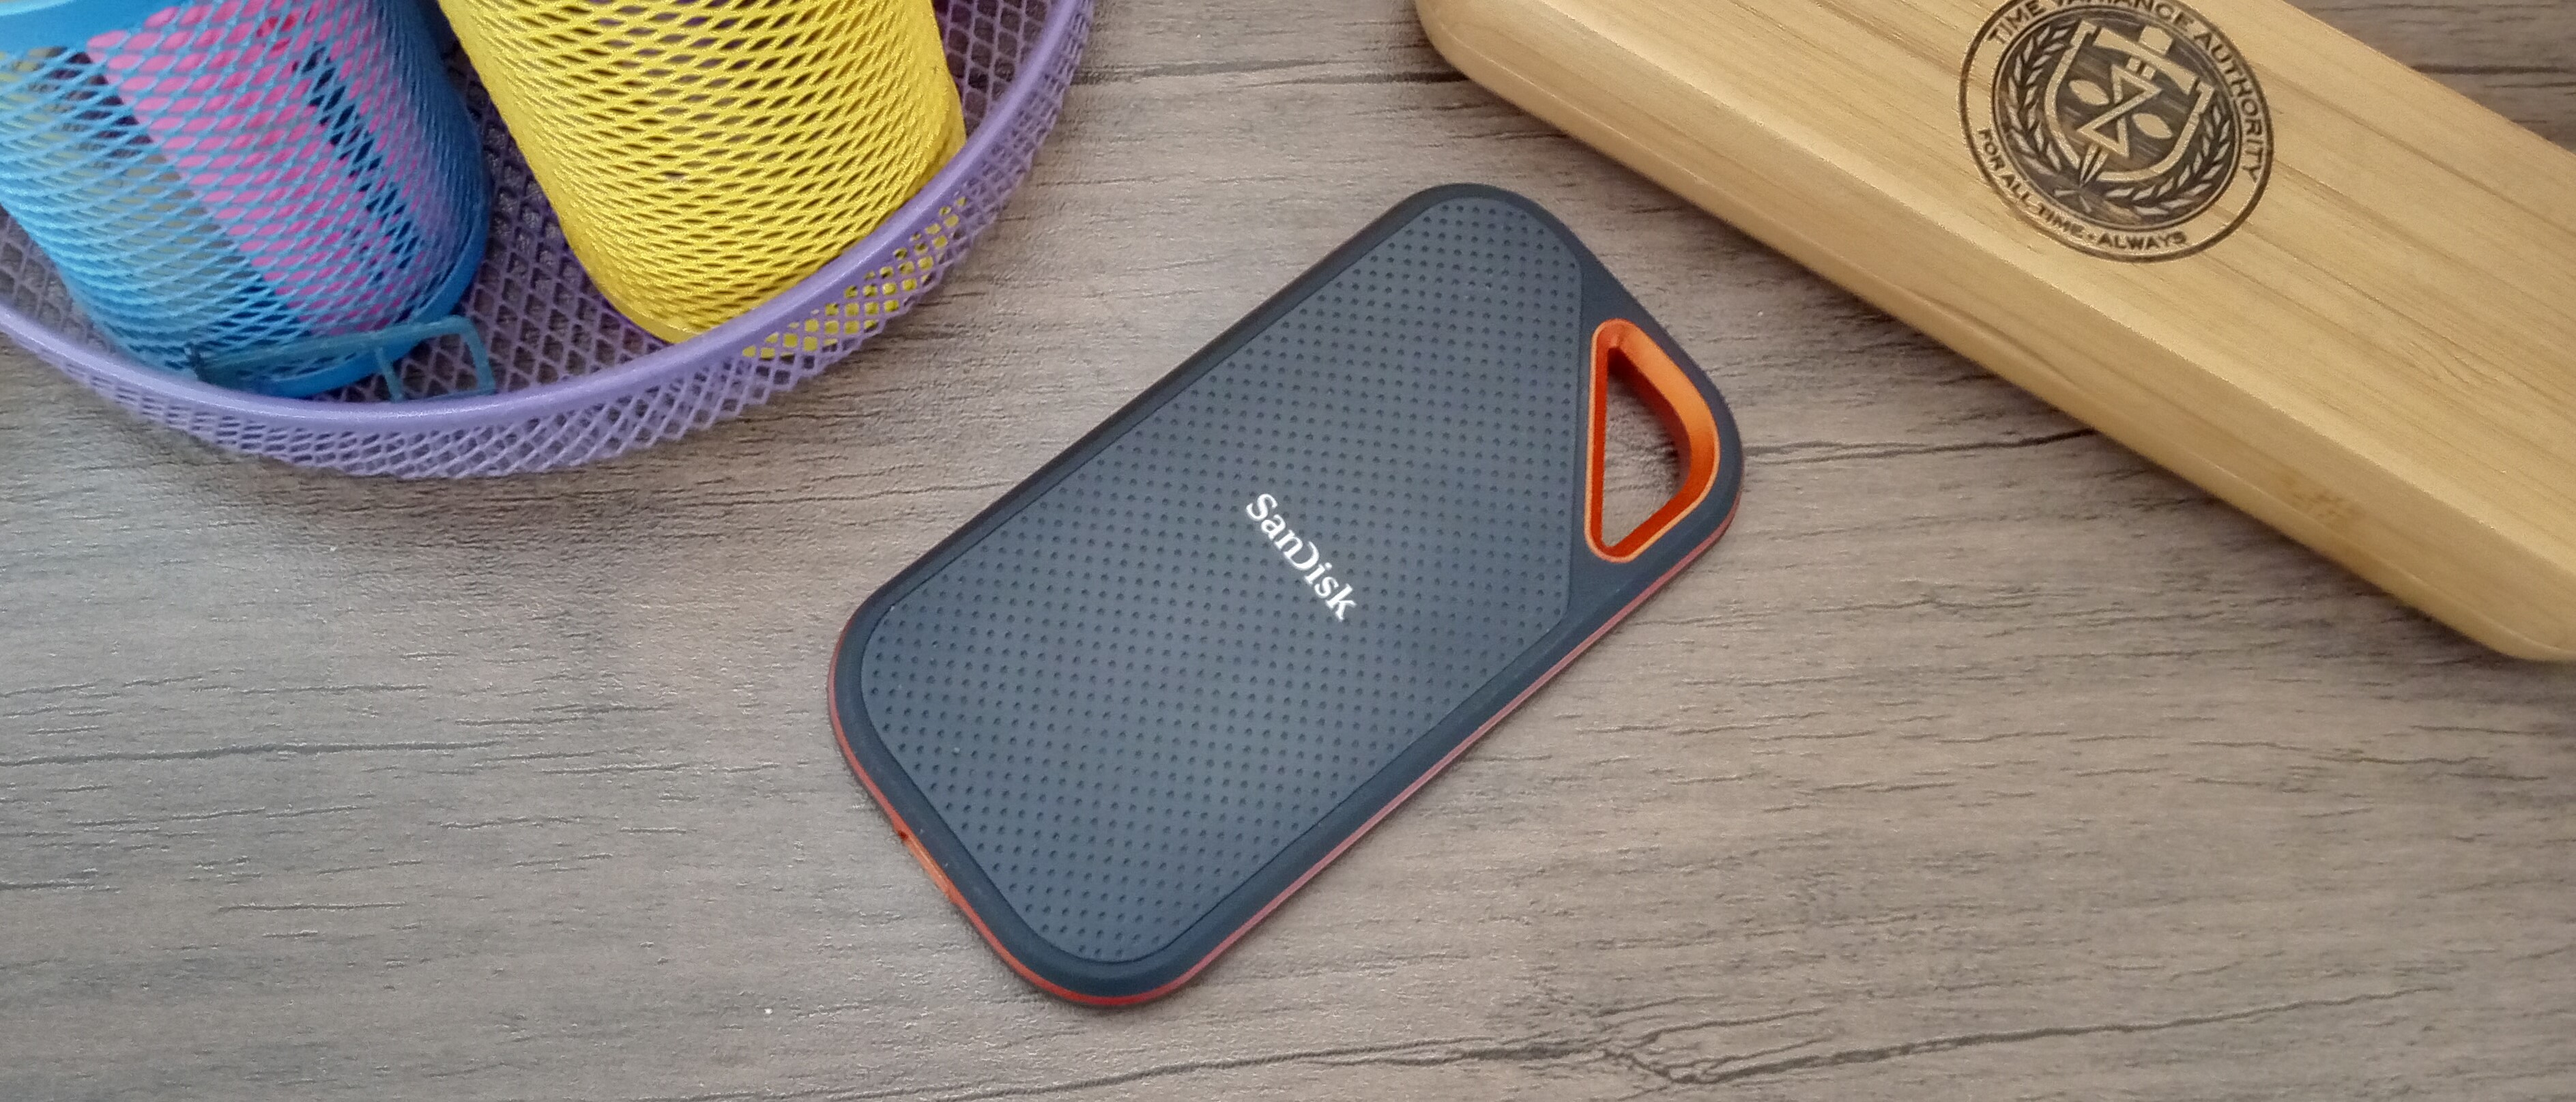 Sandisk Extreme Portable SSD Review